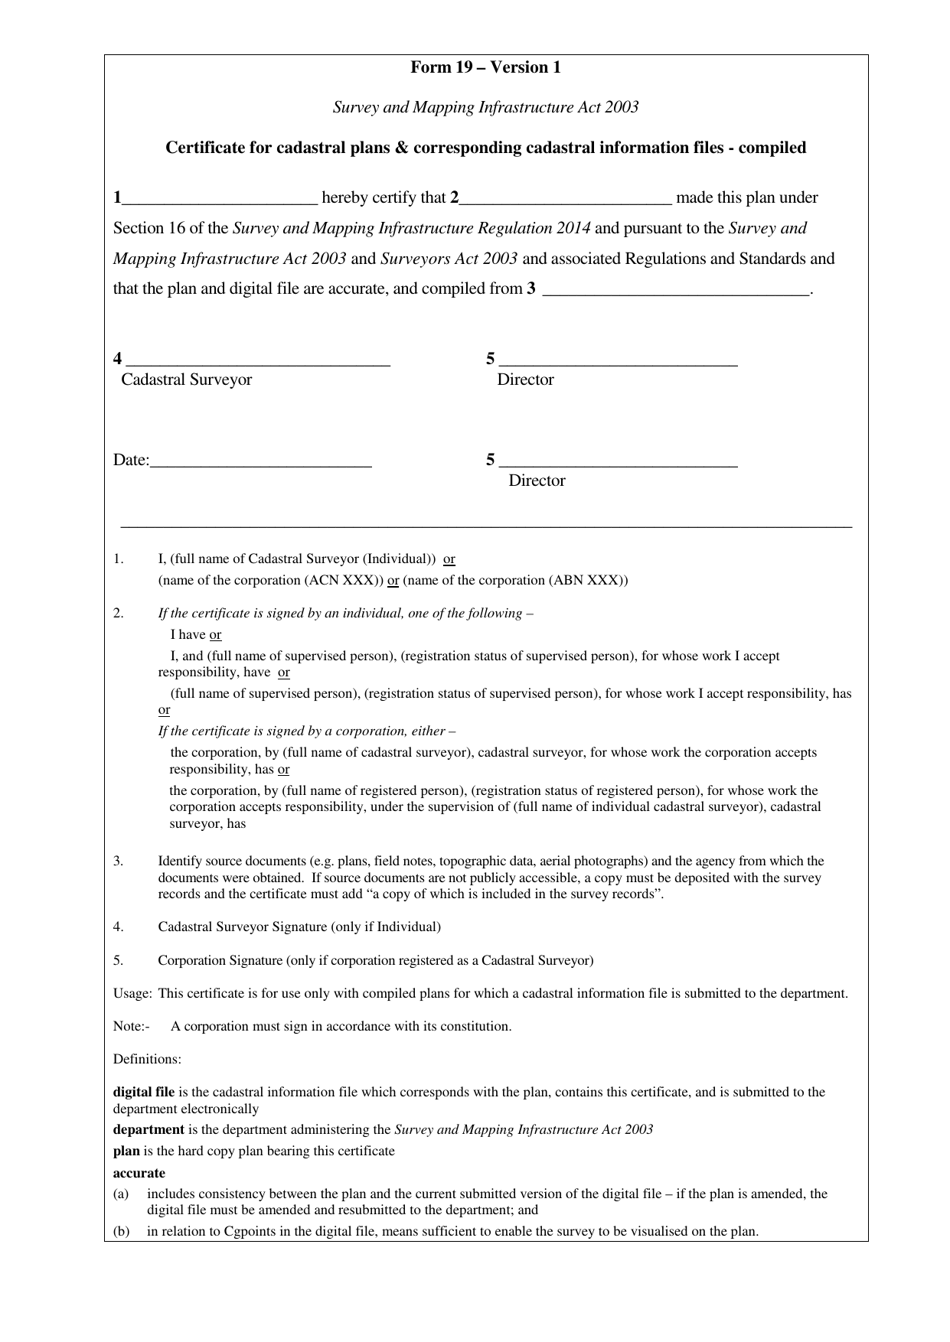 Form 19 Certificate for Cadastral Plans  Corresponding Cadastral Information Files - Compiled - Queensland, Australia, Page 1